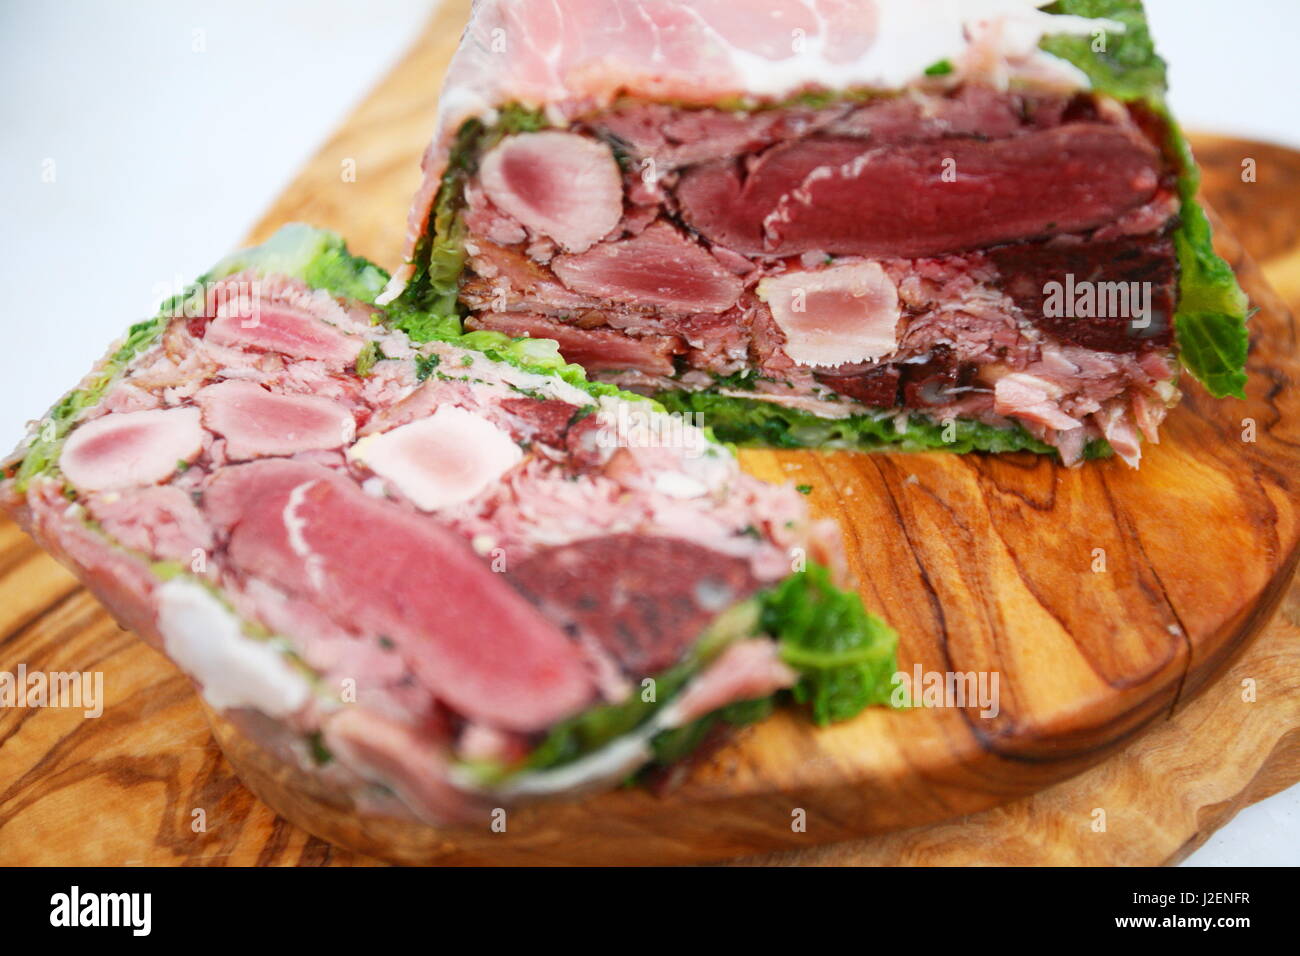 A meat terrine with one slice bit on a wooden board Stock Photo